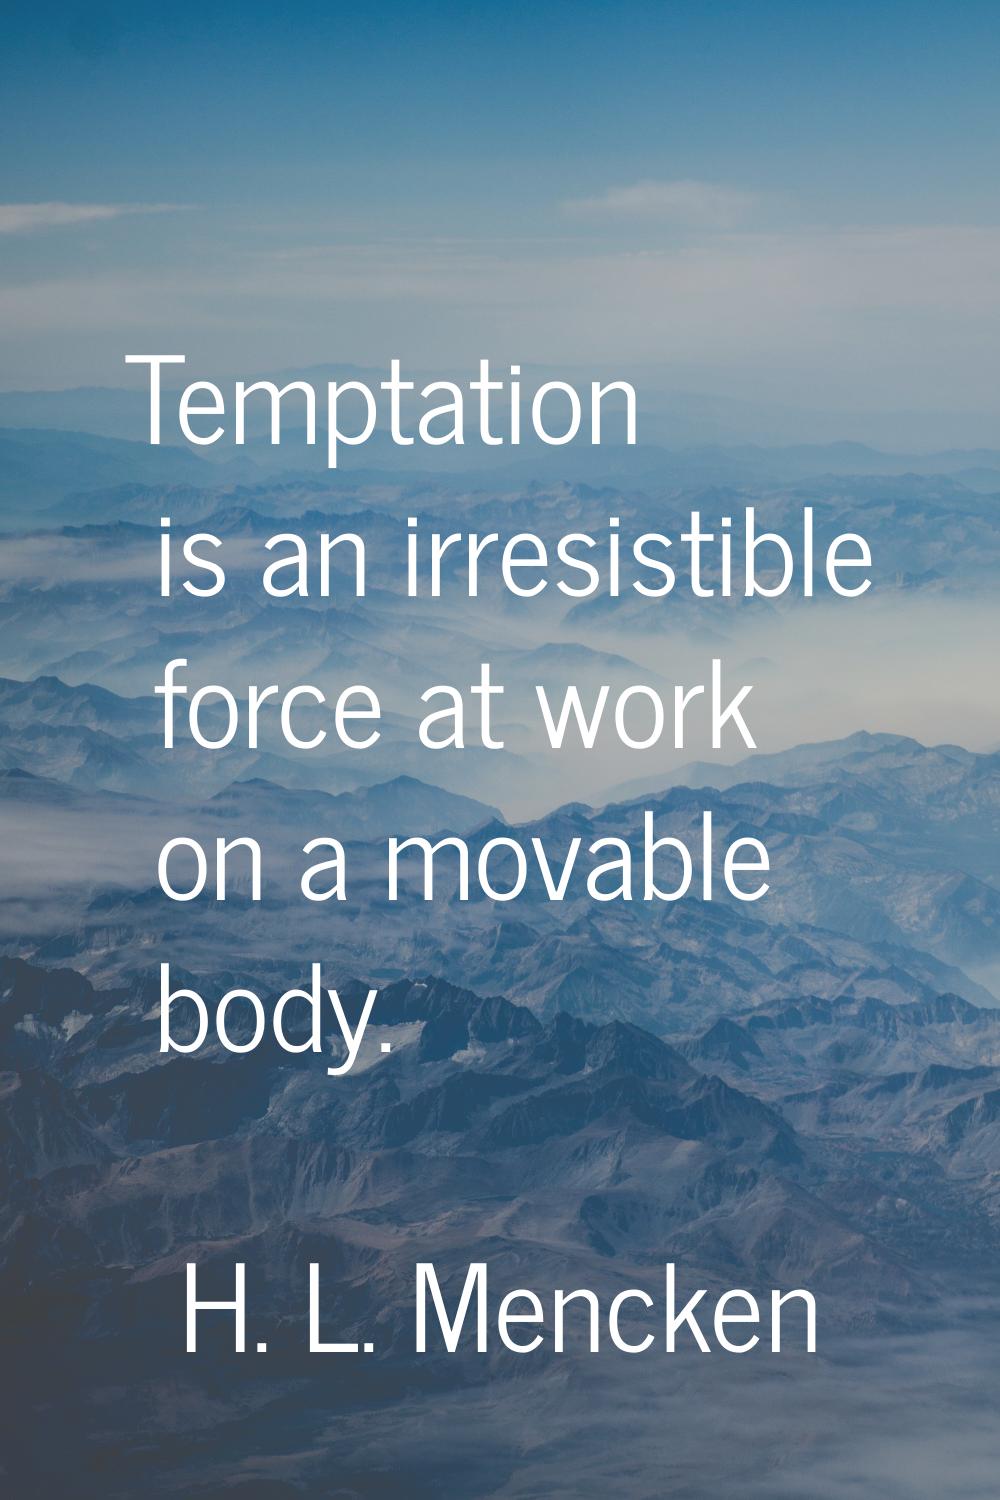 Temptation is an irresistible force at work on a movable body.